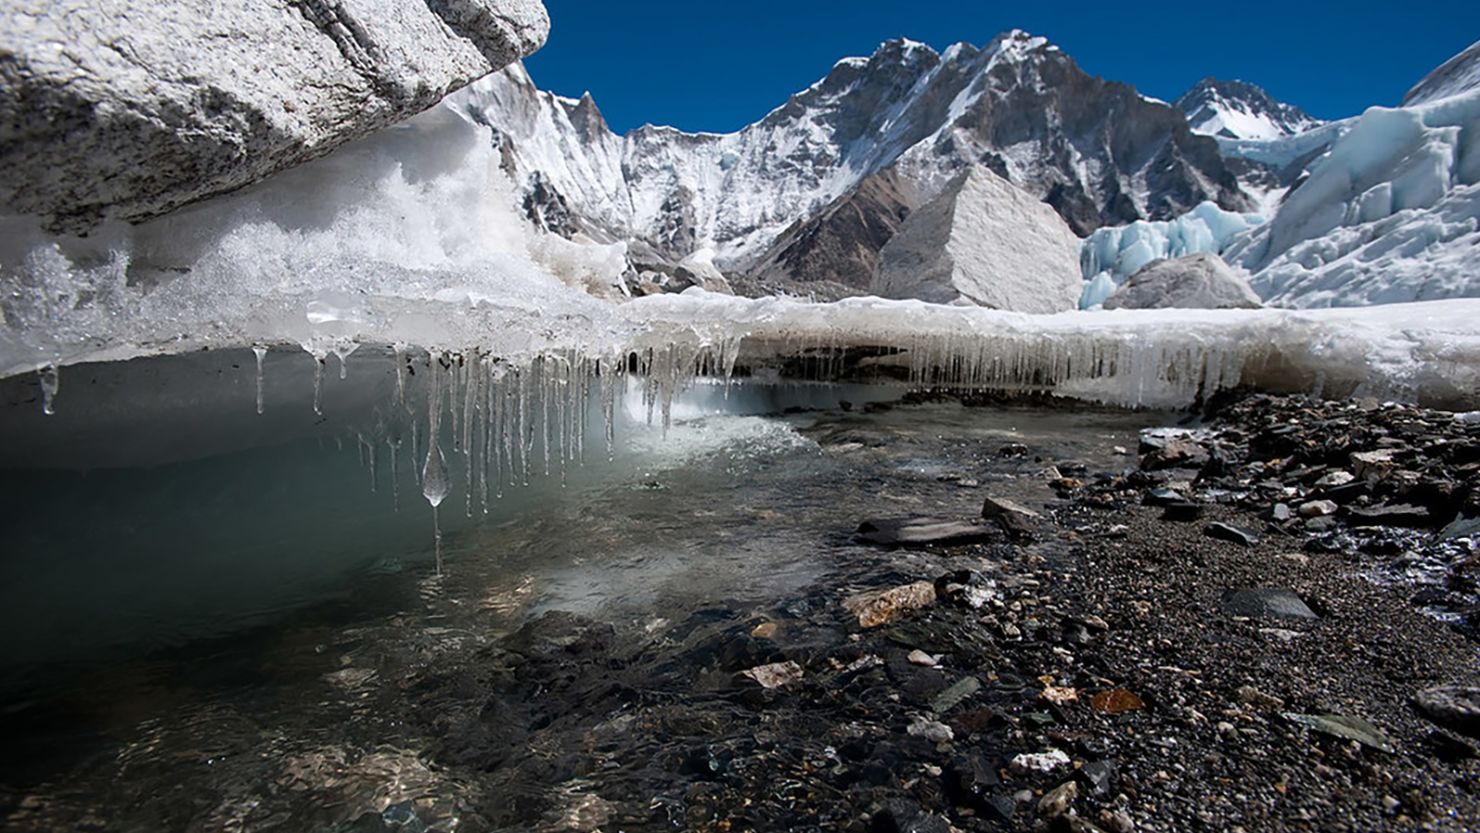 Water drips under Nepal's Khumbu glacier as the ice melts.